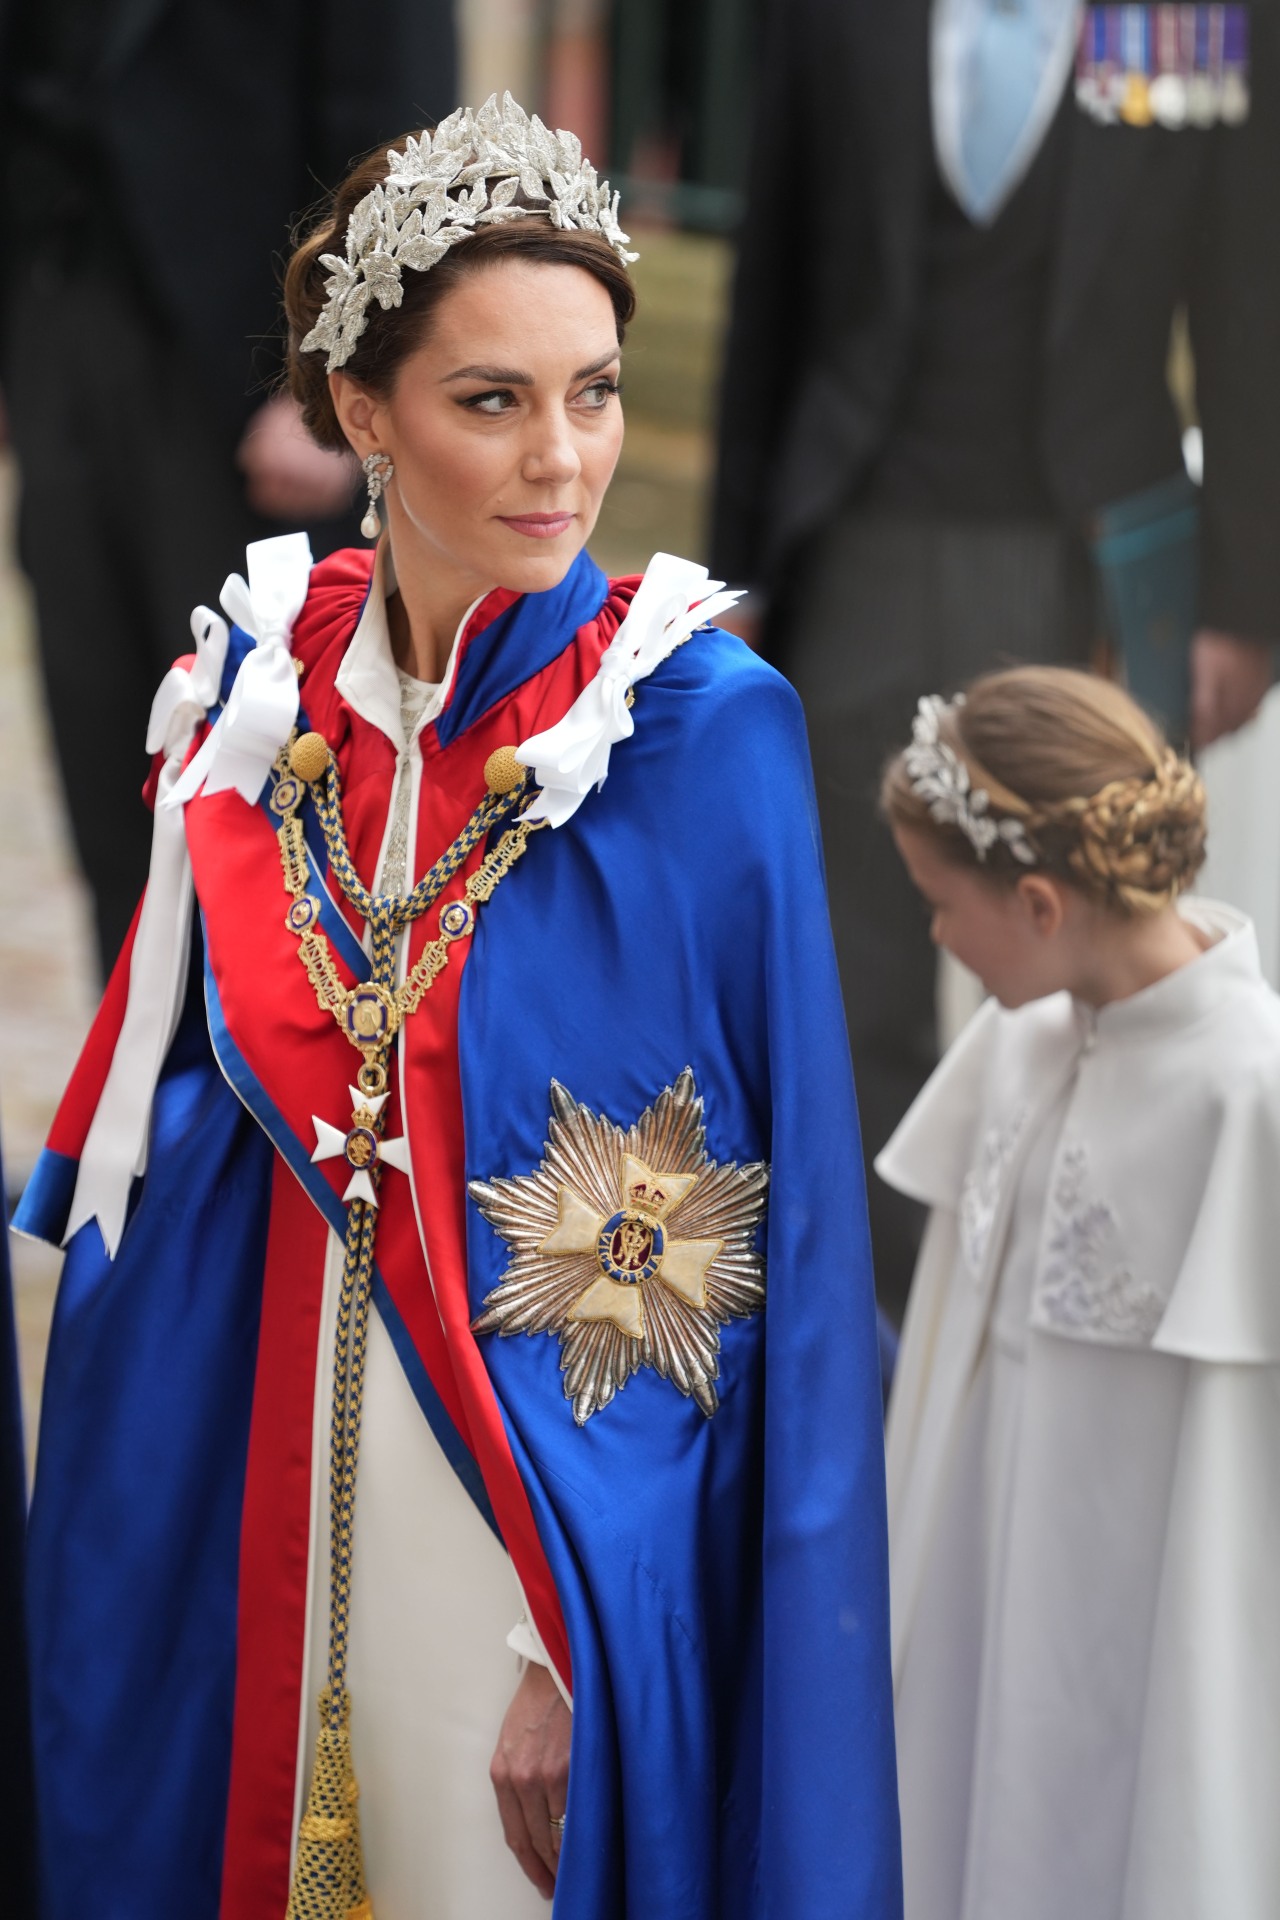 Why Kate Middleton’s Coronation Outfit Included These Royal Rules